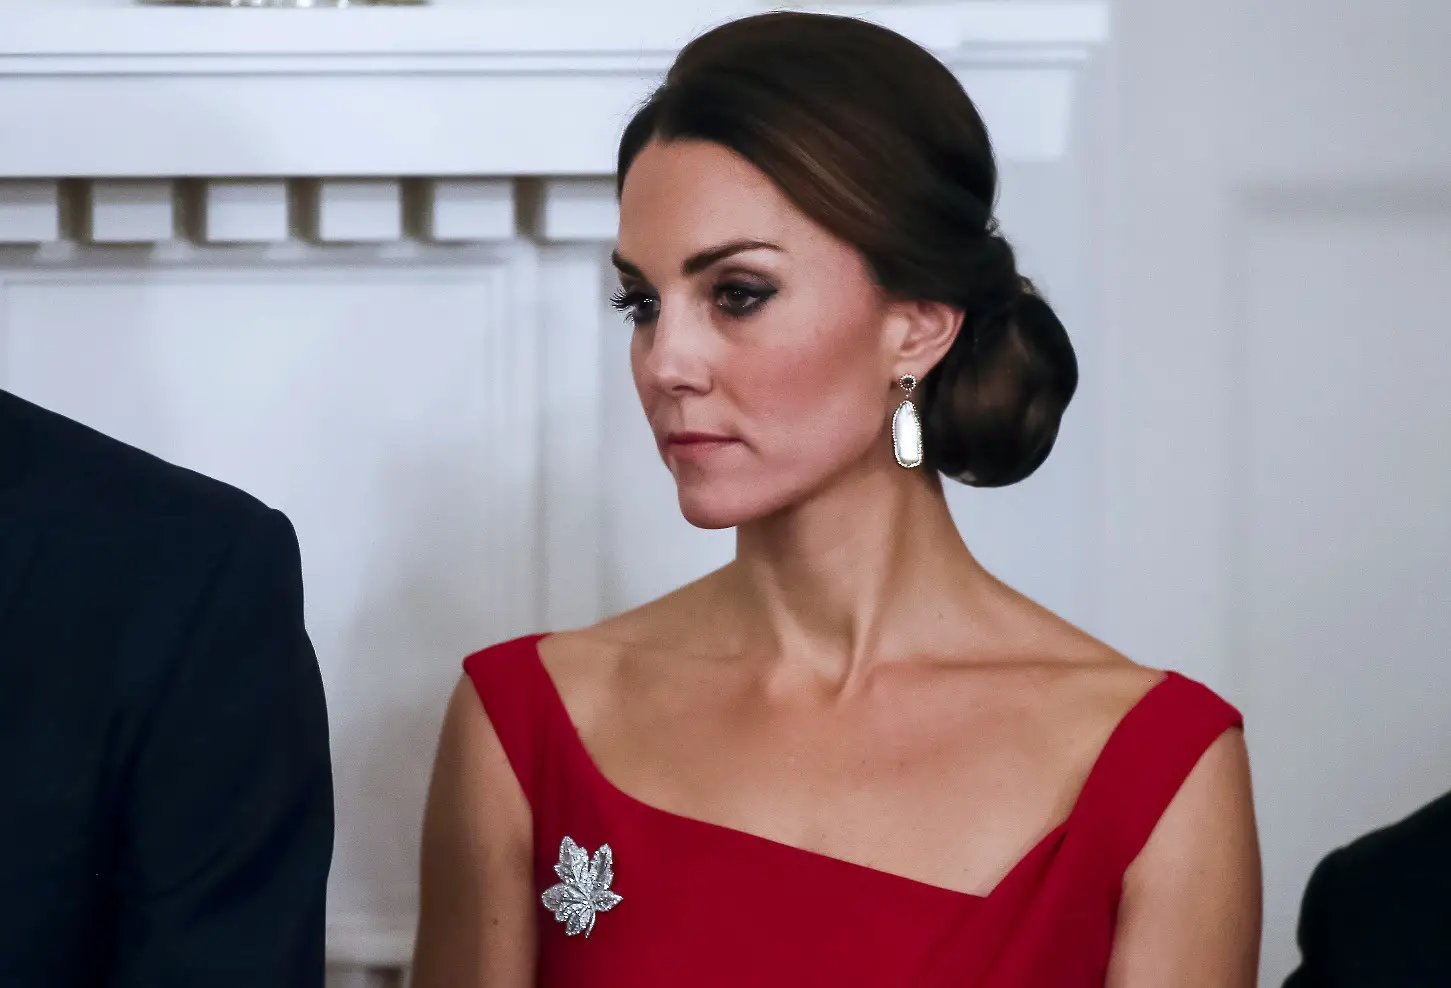 The Duchess of Cambridge looked stylish and elegant in red Preen by Thornton Bregazzi Finella Satin Midi Dress and Sory earrings at black rod ceremony in Canada